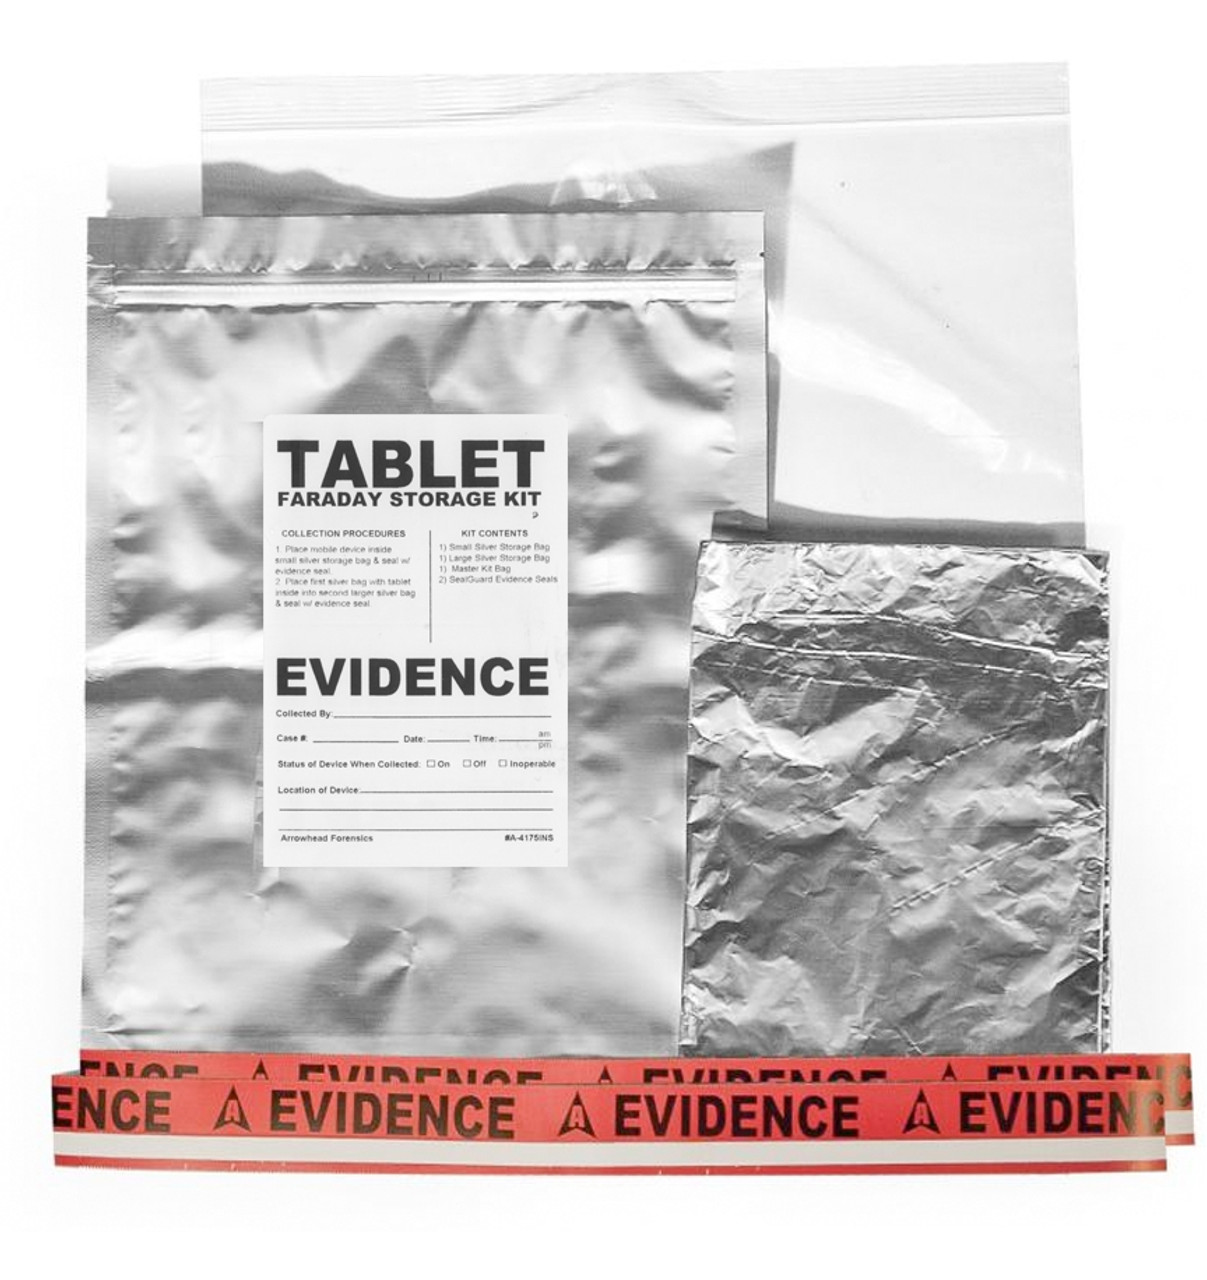 SiForce Faraday Bags evidence cell phone